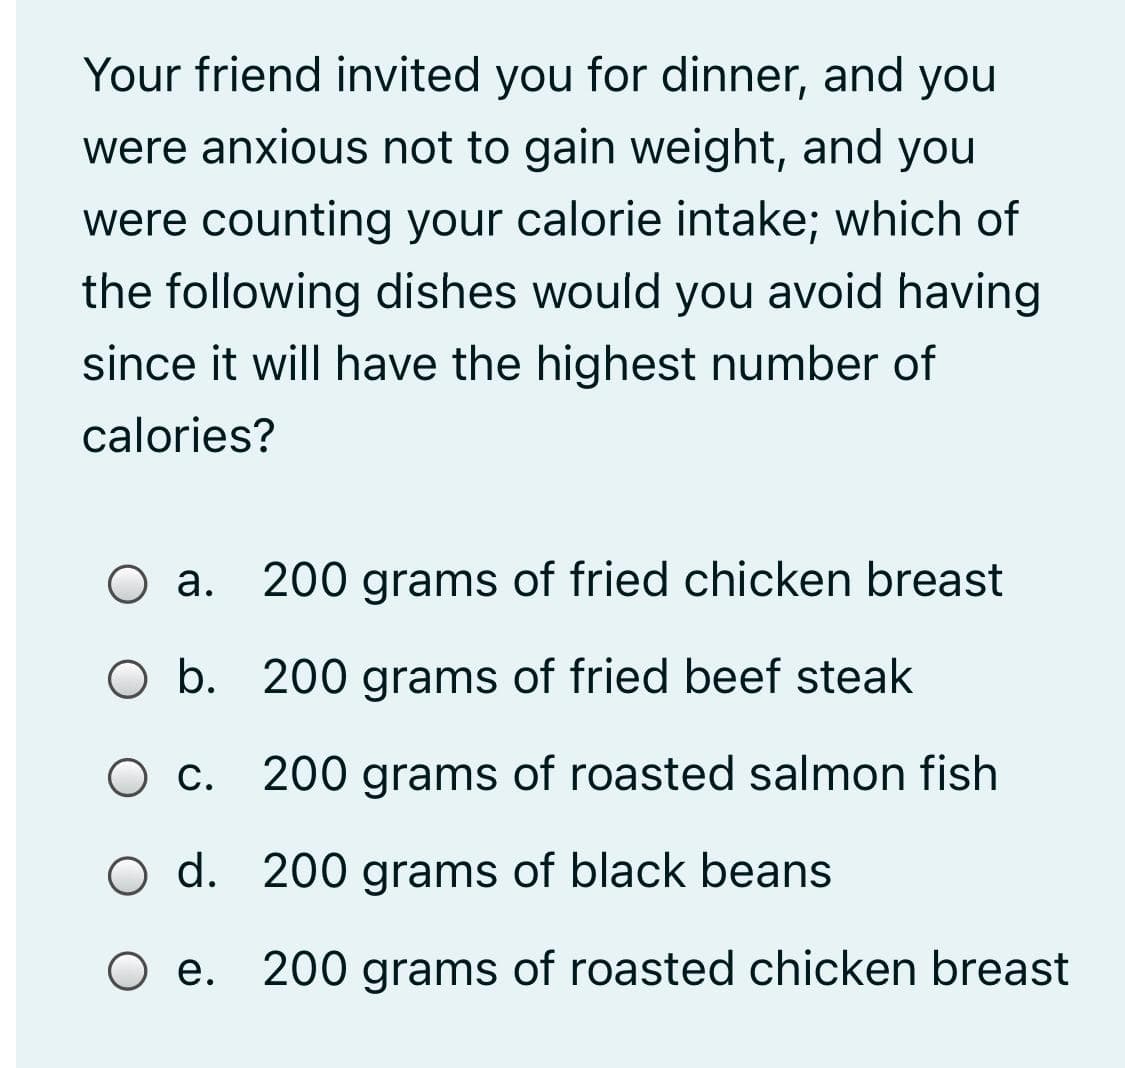 Your friend invited you for dinner, and you
were anxious not to gain weight, and you
were counting your calorie intake; which of
the following dishes would you avoid having
since it will have the highest number of
calories?
Оа.
200 grams of fried chicken breast
O b. 200 grams of fried beef steak
О с
200 grams of roasted salmon fish
O d. 200 grams of black beans
O e. 200 grams of roasted chicken breast
